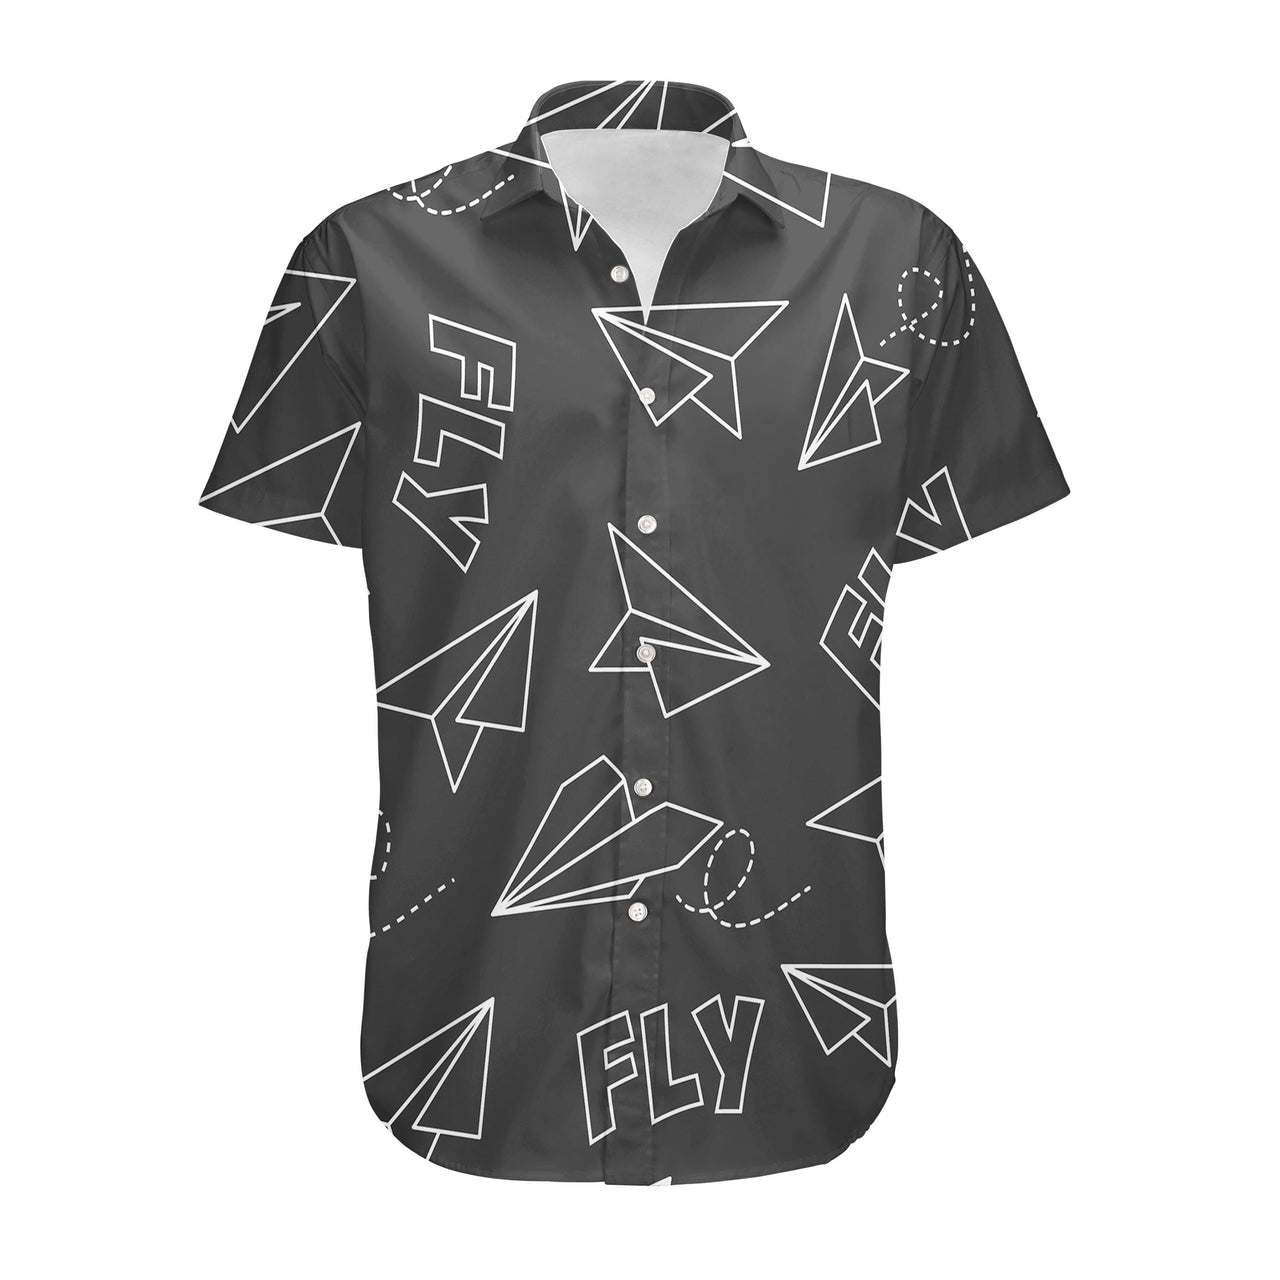 Paper Airplane & Fly (Gray) Designed 3D Shirts